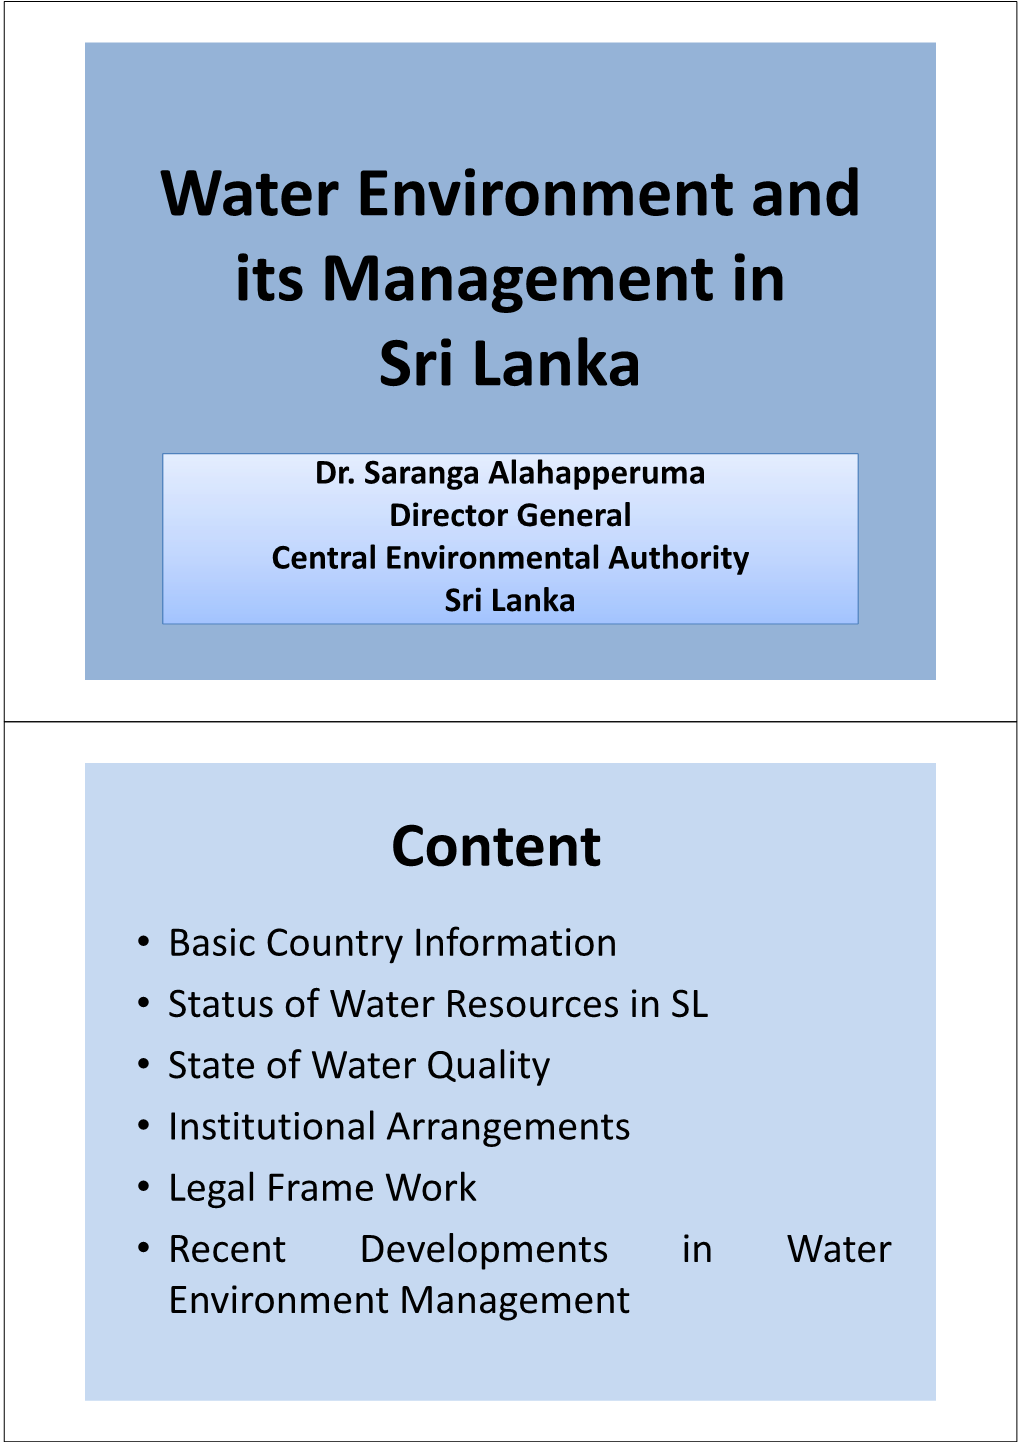 Water Environment and Its Management in Sri Lanka